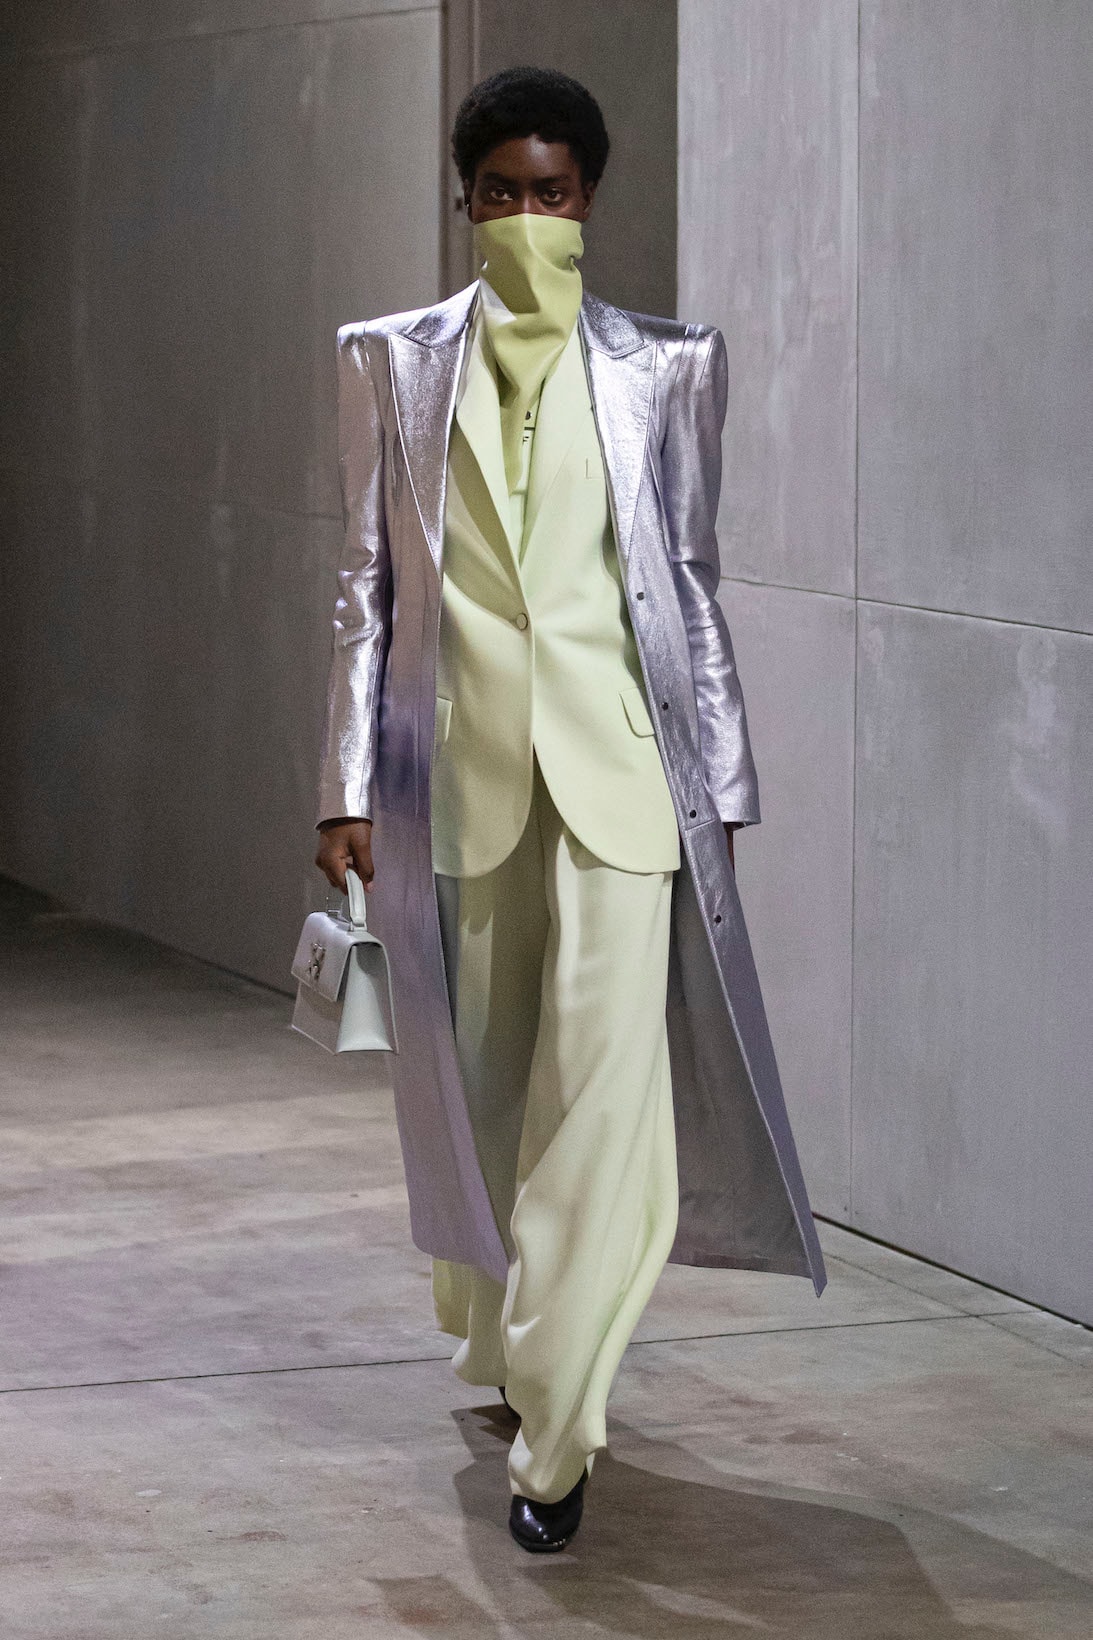 off white virgil abloh spring summer adam is eve collection imaginary tv digital runway show blazer silver gray pastel green jacket outerwear pants bag shoes